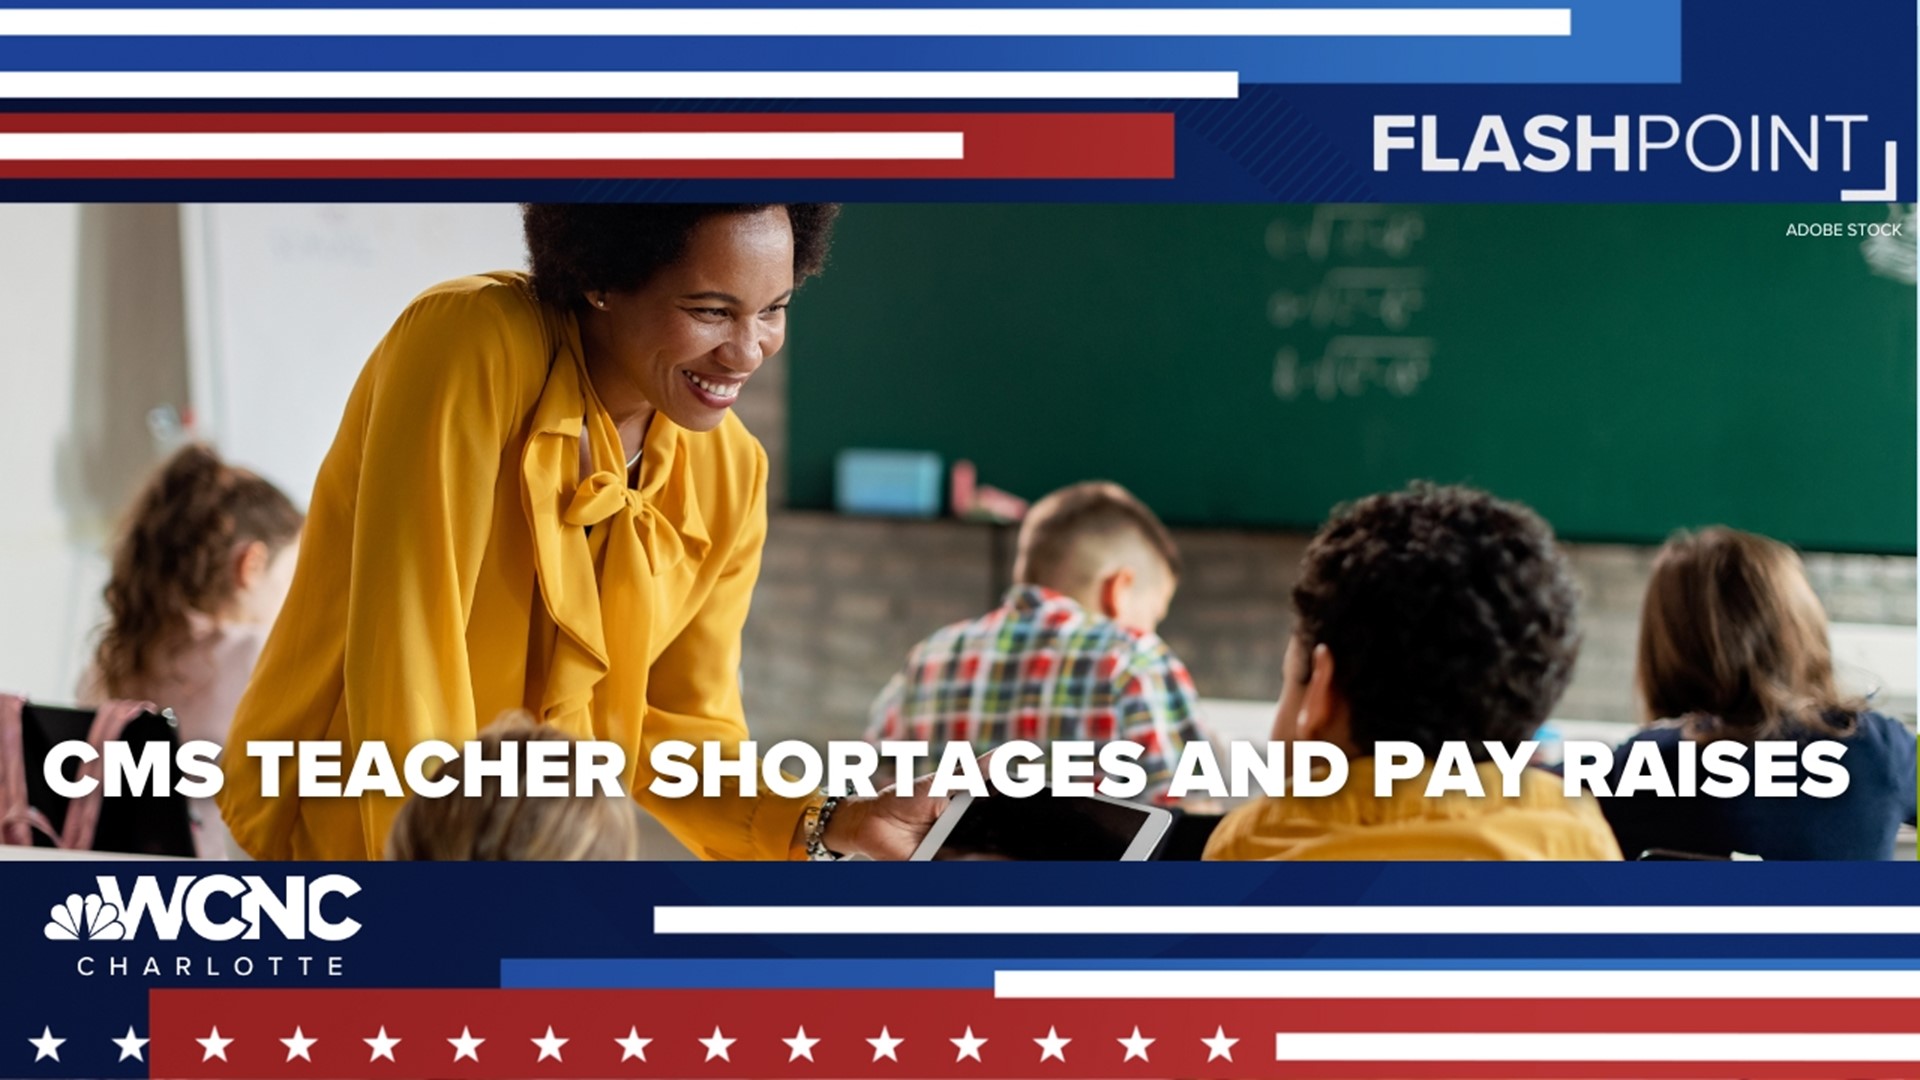 On Flashpoint, a teacher and CMS board member discuss teacher shortages and pay raises.